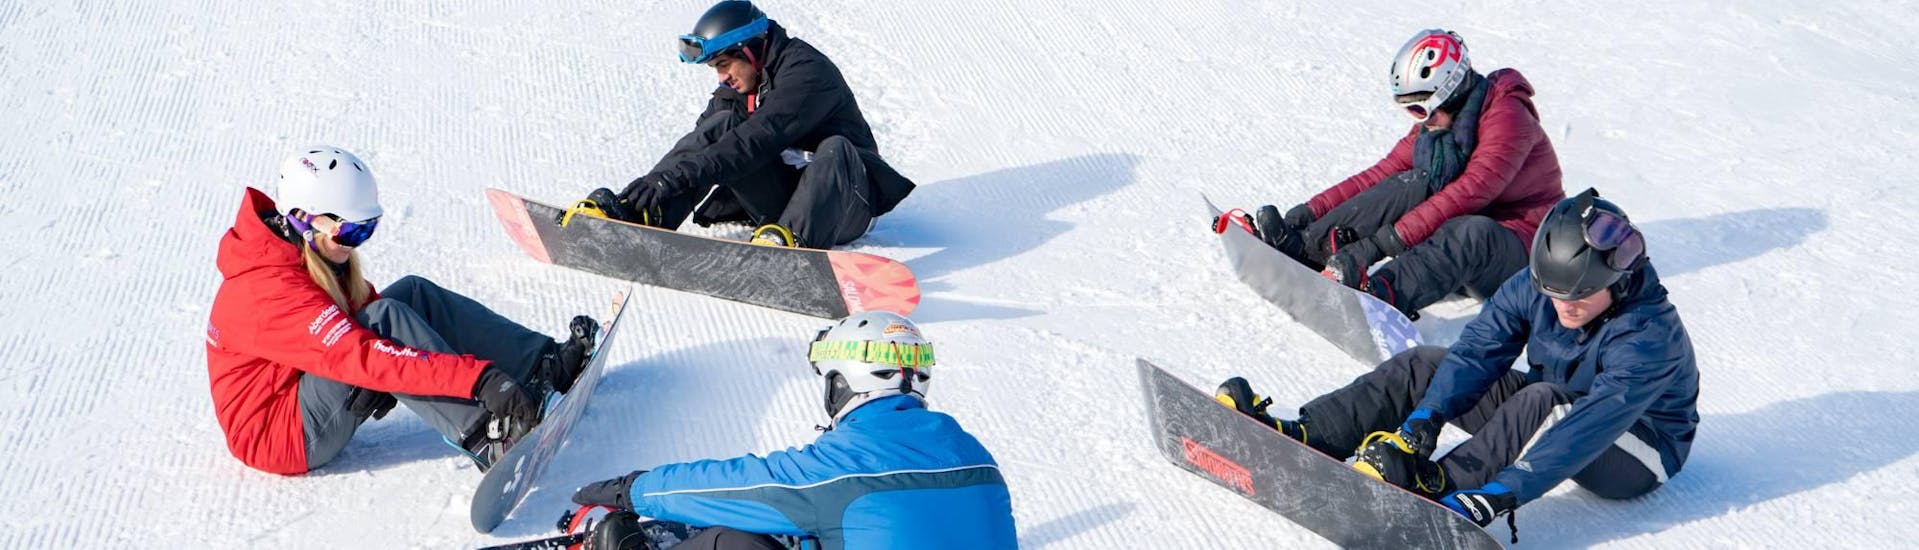 A group of snowboarders practise standing up at the snowboarding lessons for adults + snowboard rental for first timers with the Swiss Ski School Grindelwald.